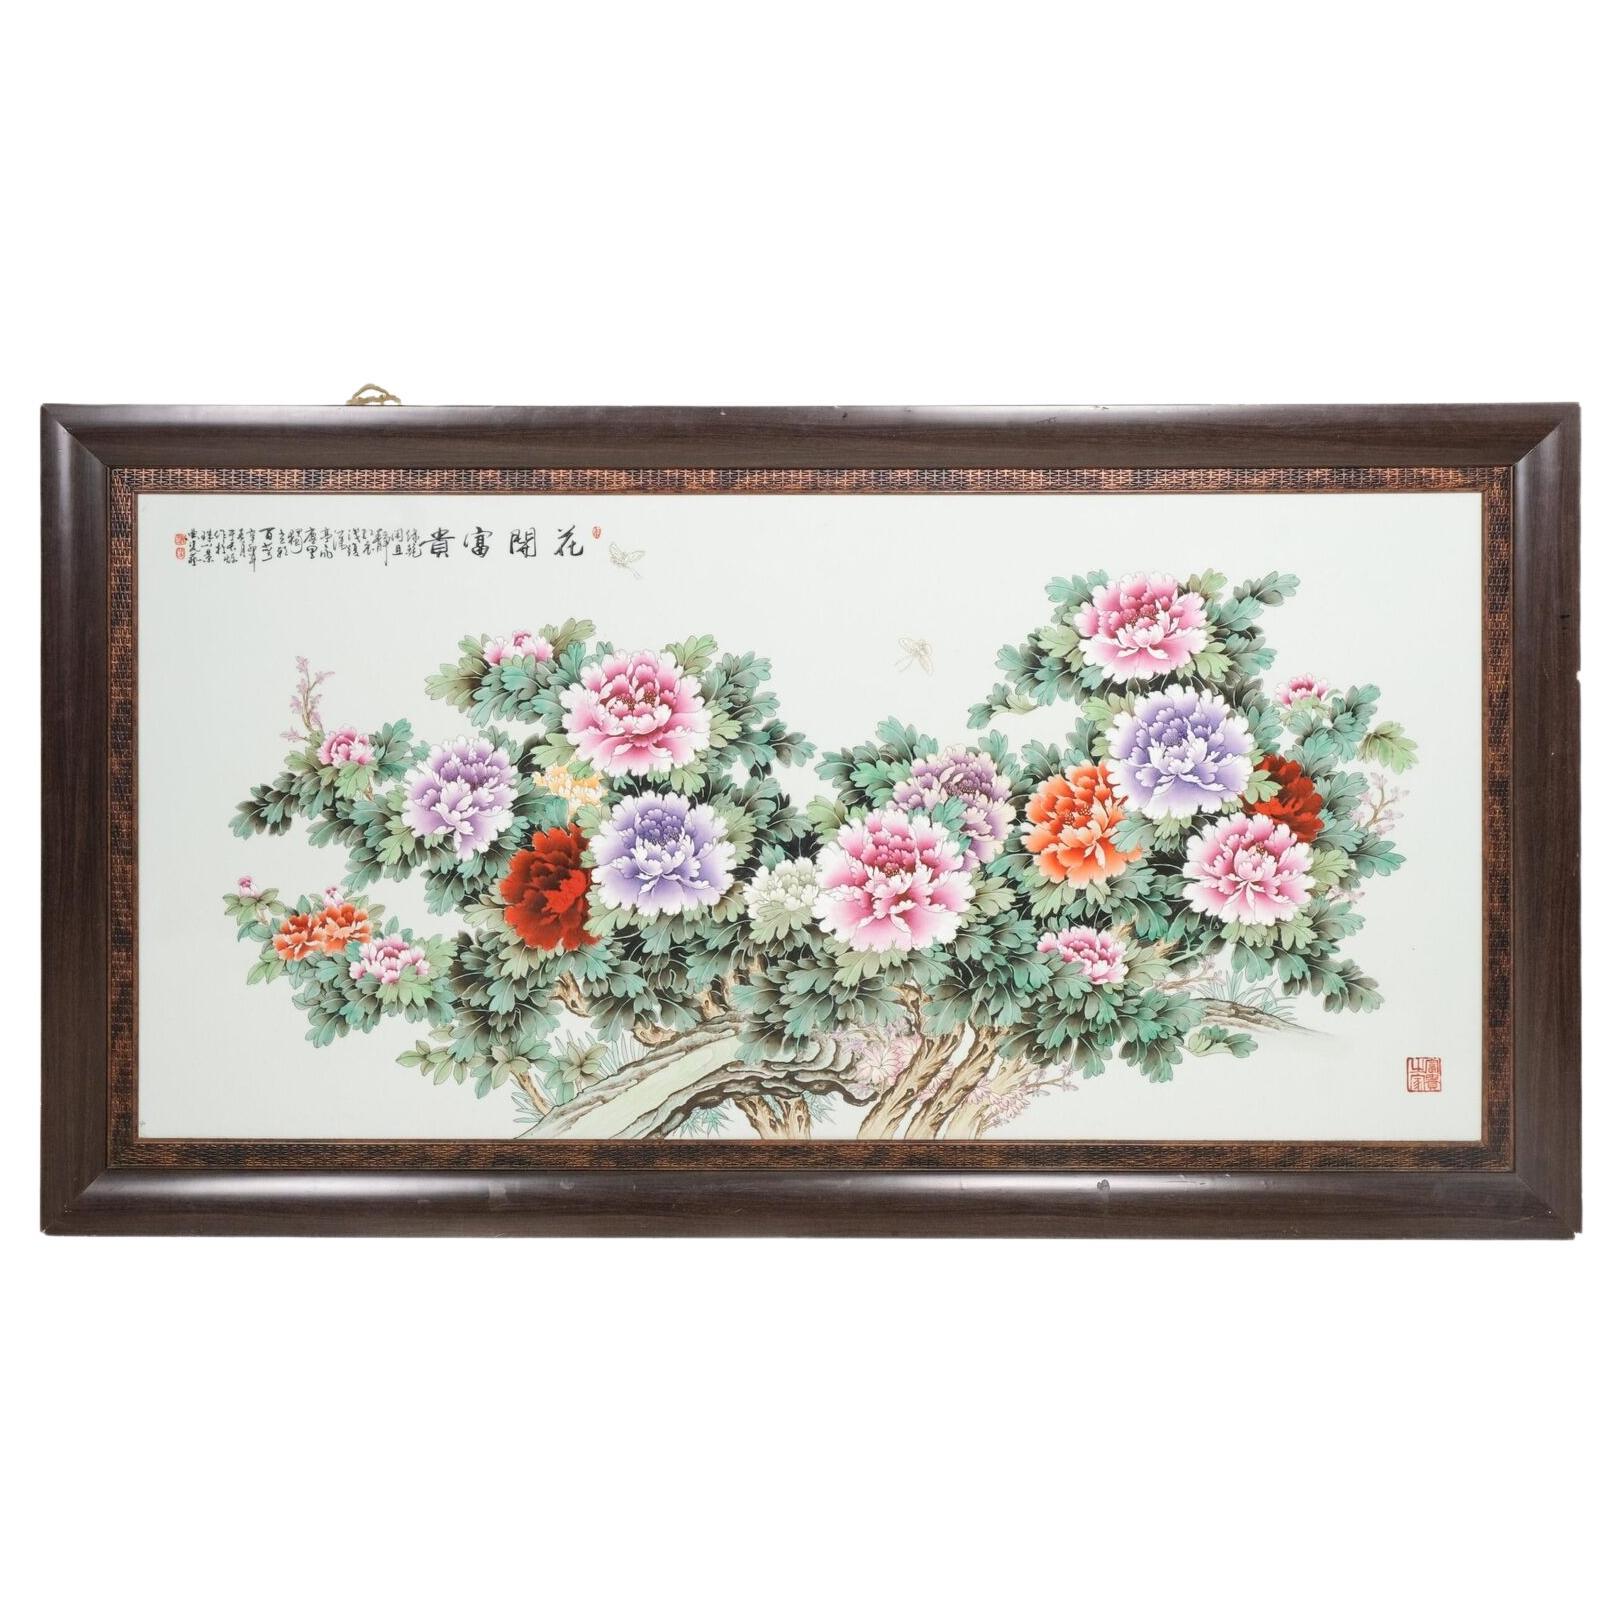 Huge 2 meter Large Chinese Porcelain Plaque Painting Flowers Ca 1960 - 1980 Fenc